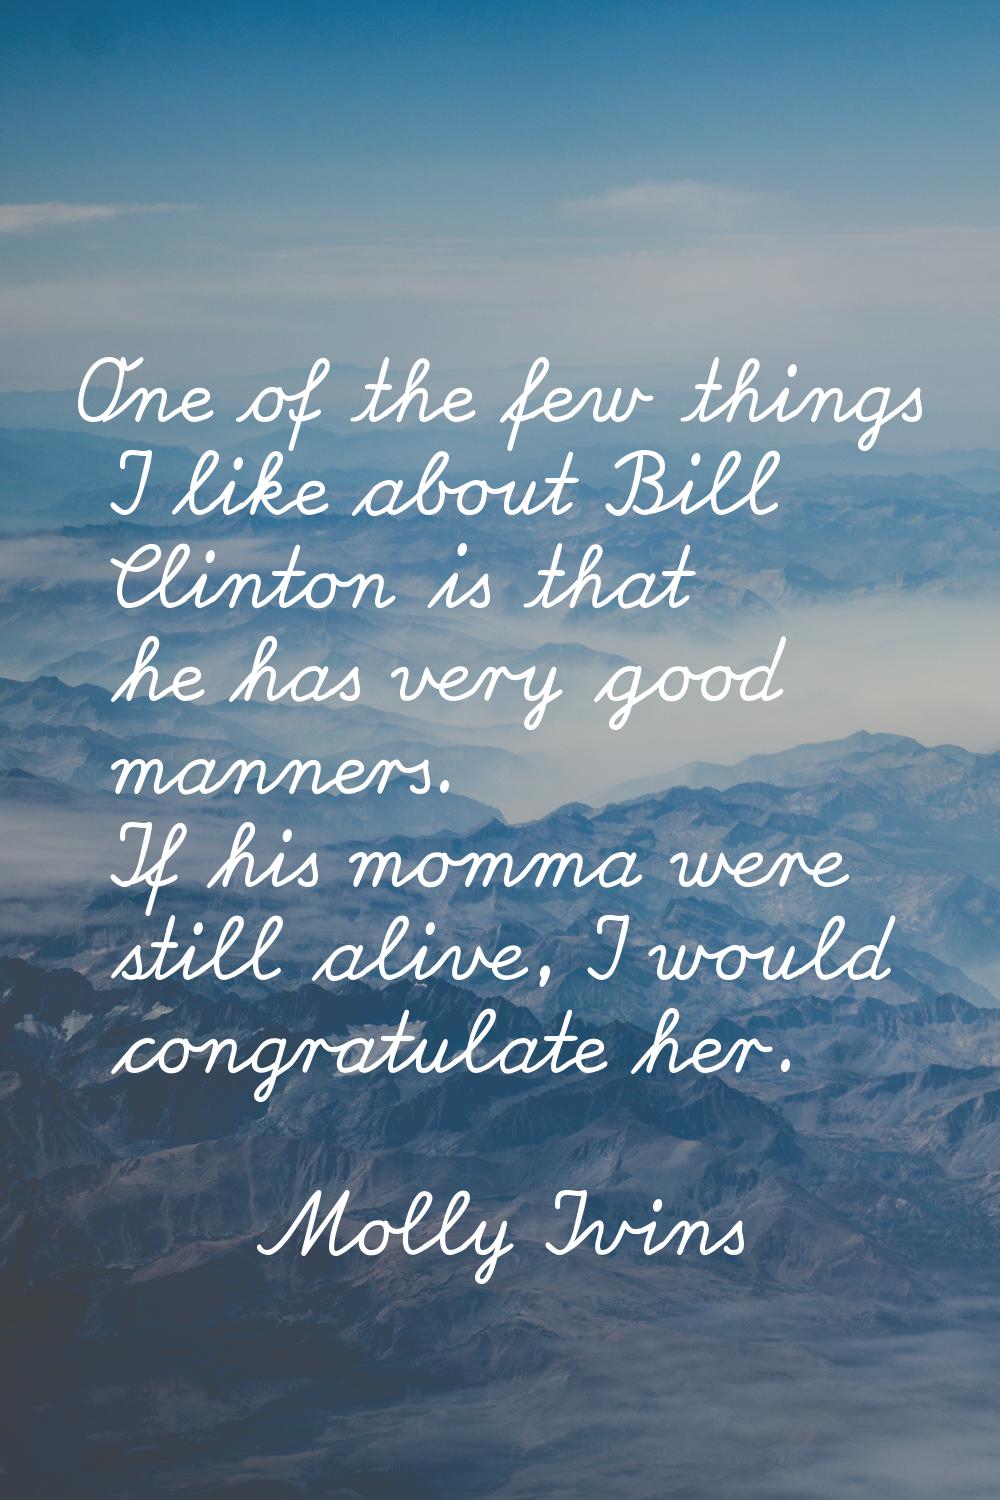 One of the few things I like about Bill Clinton is that he has very good manners. If his momma were